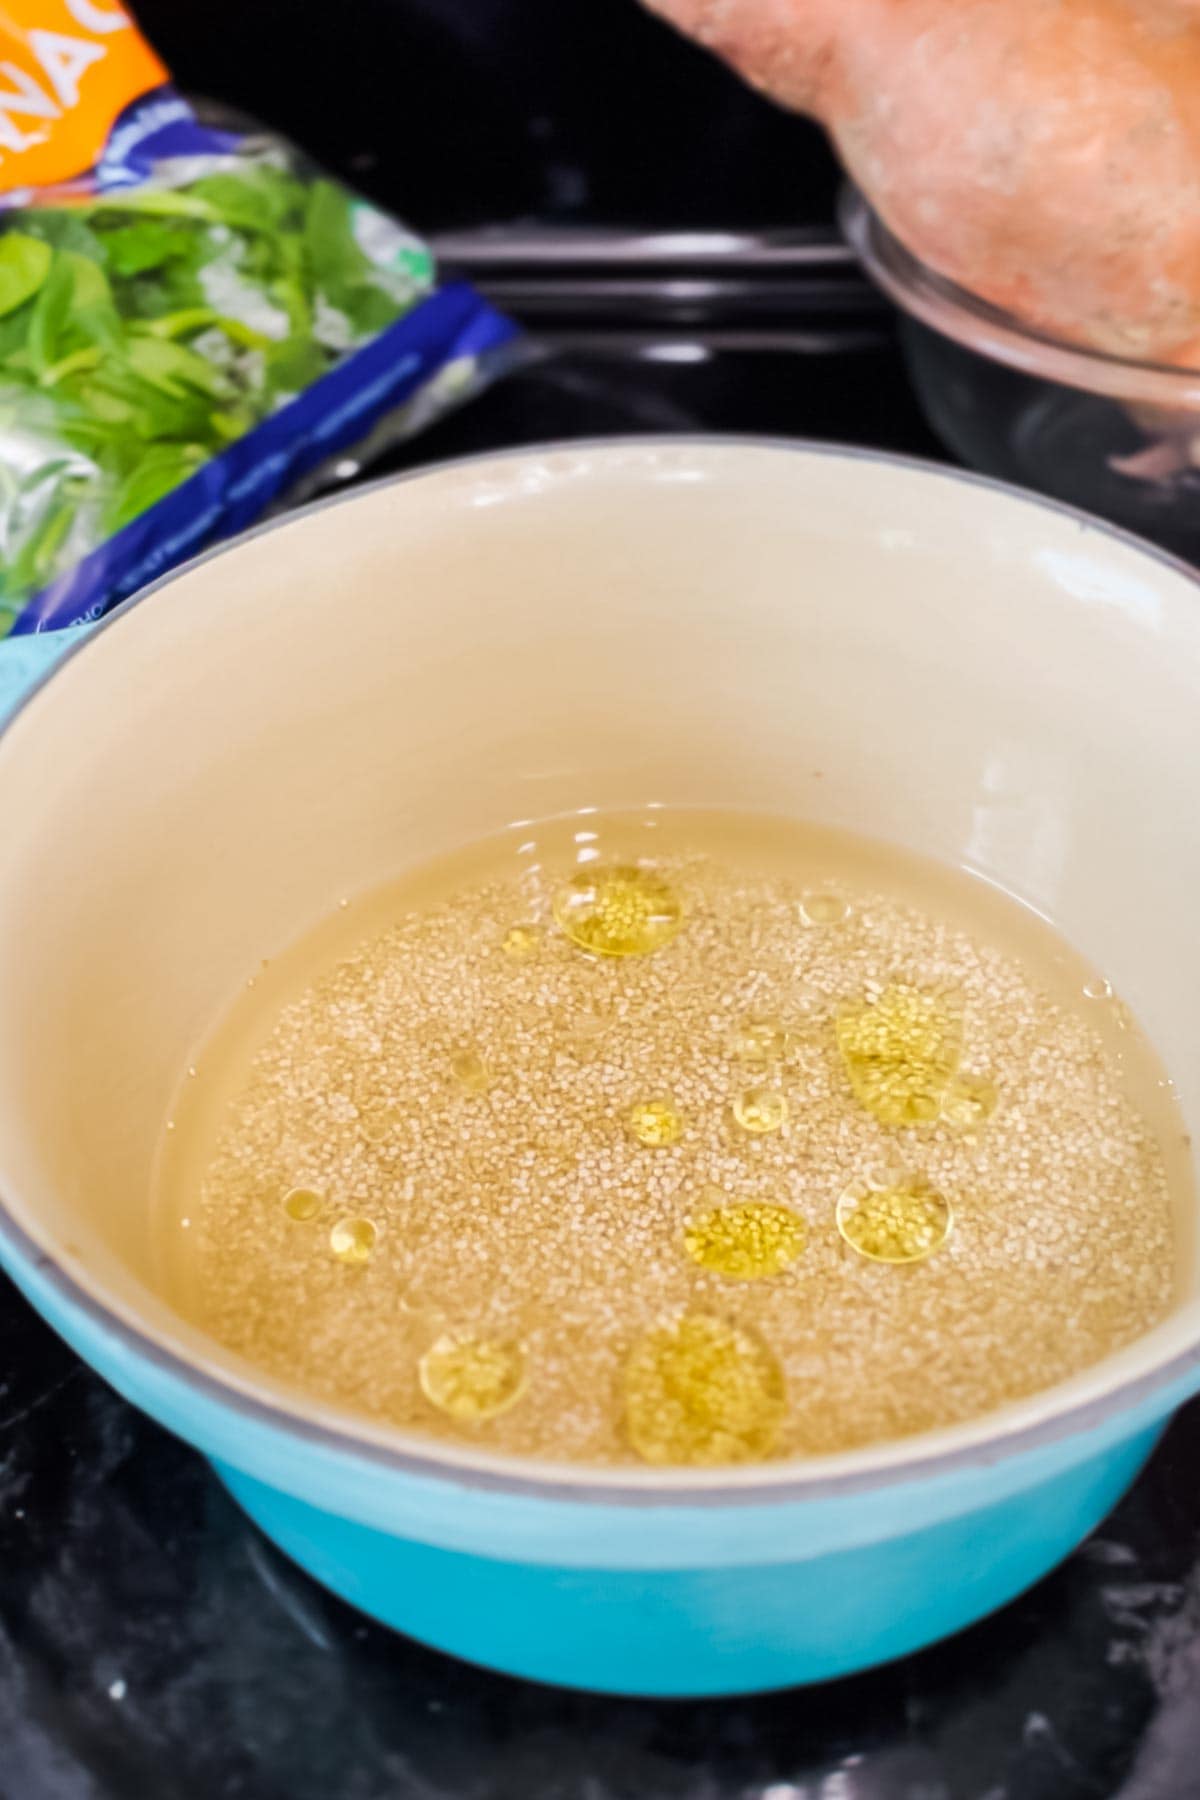 Adding olive oil to quinoa as it cooks gives it more flavor. 